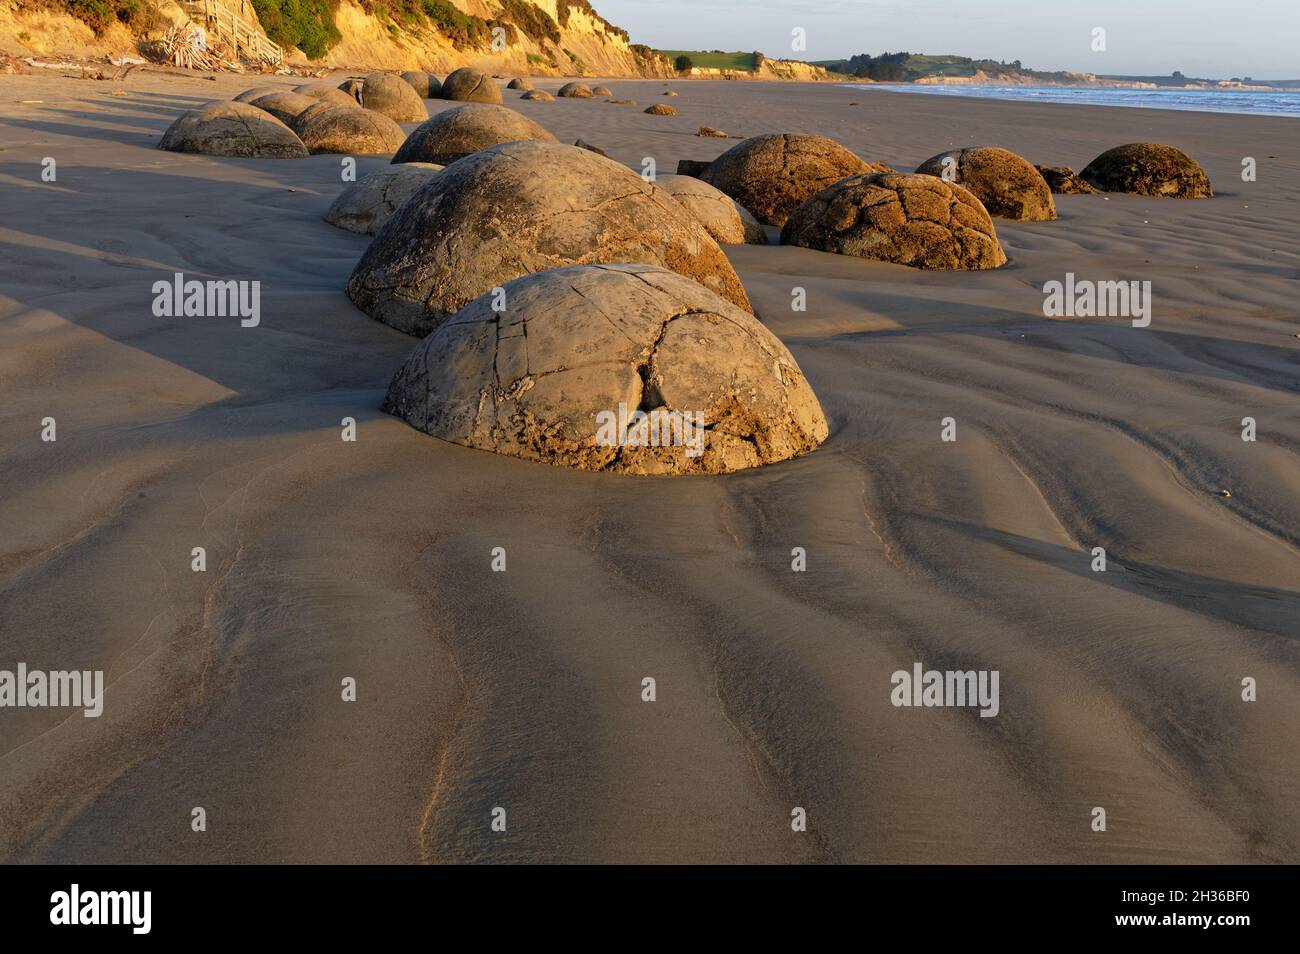 A line of Moeraki Boulders sit on the beach in New Zealand's South Island. Stock Photo